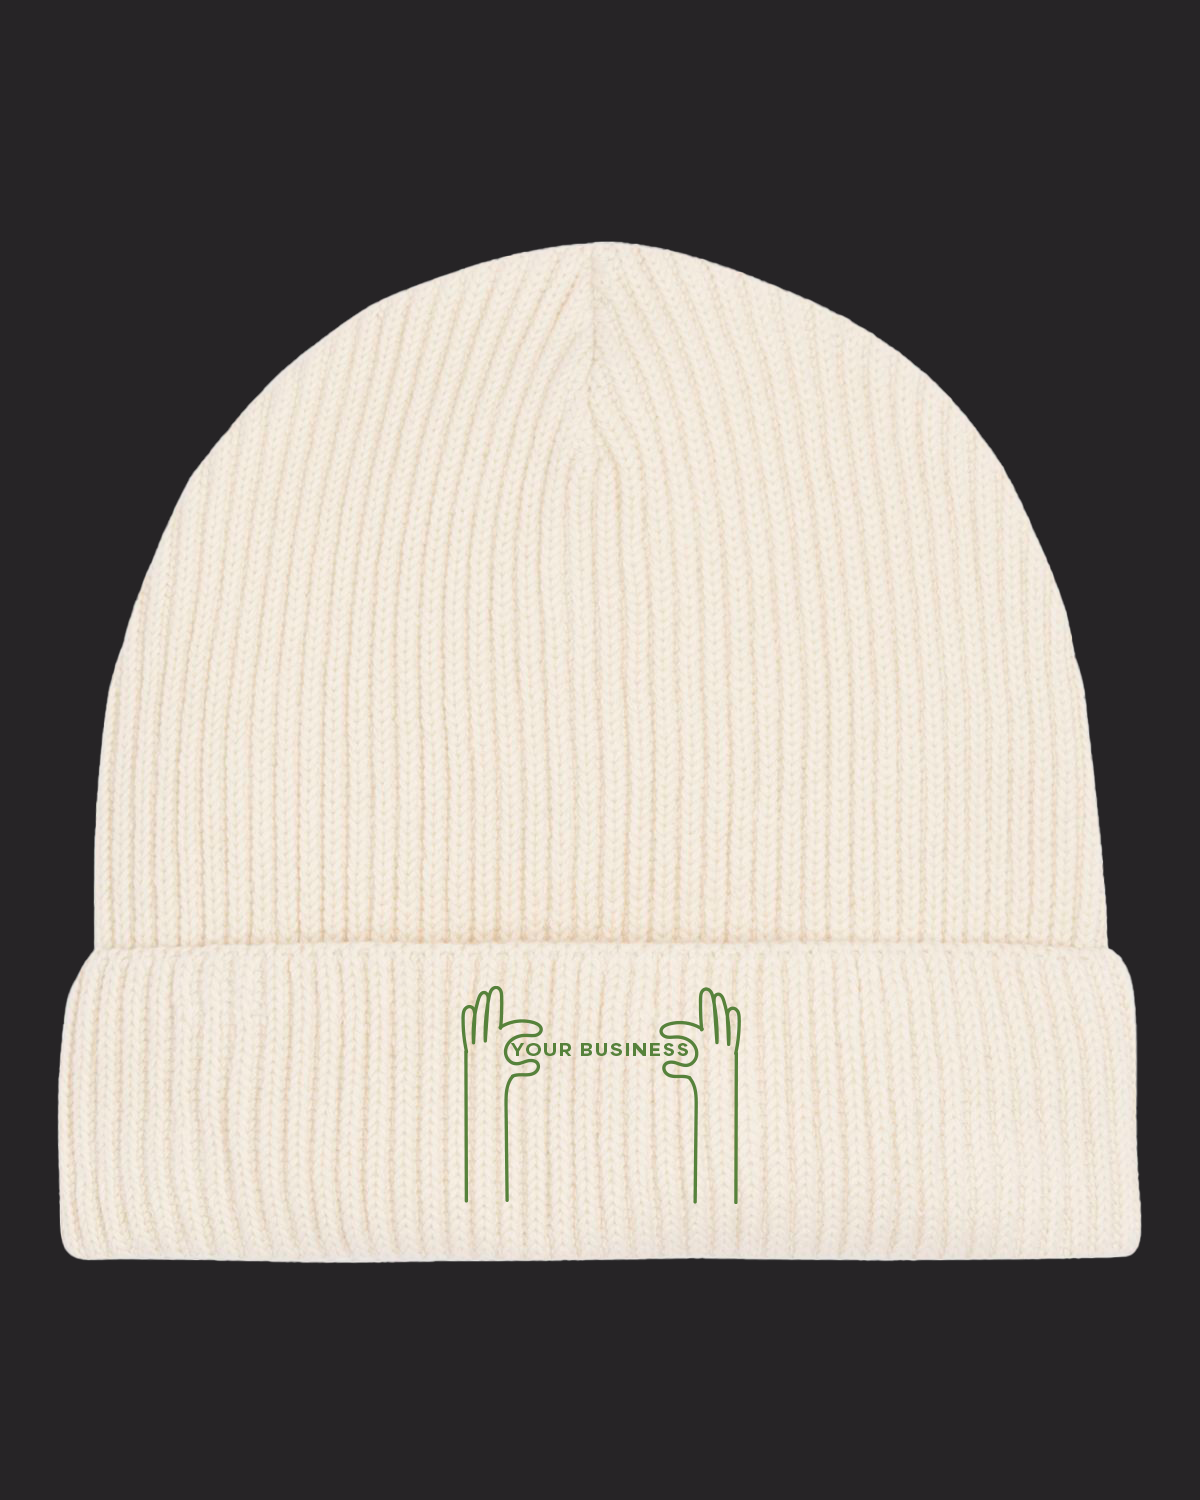 Customize your own beanie Hat